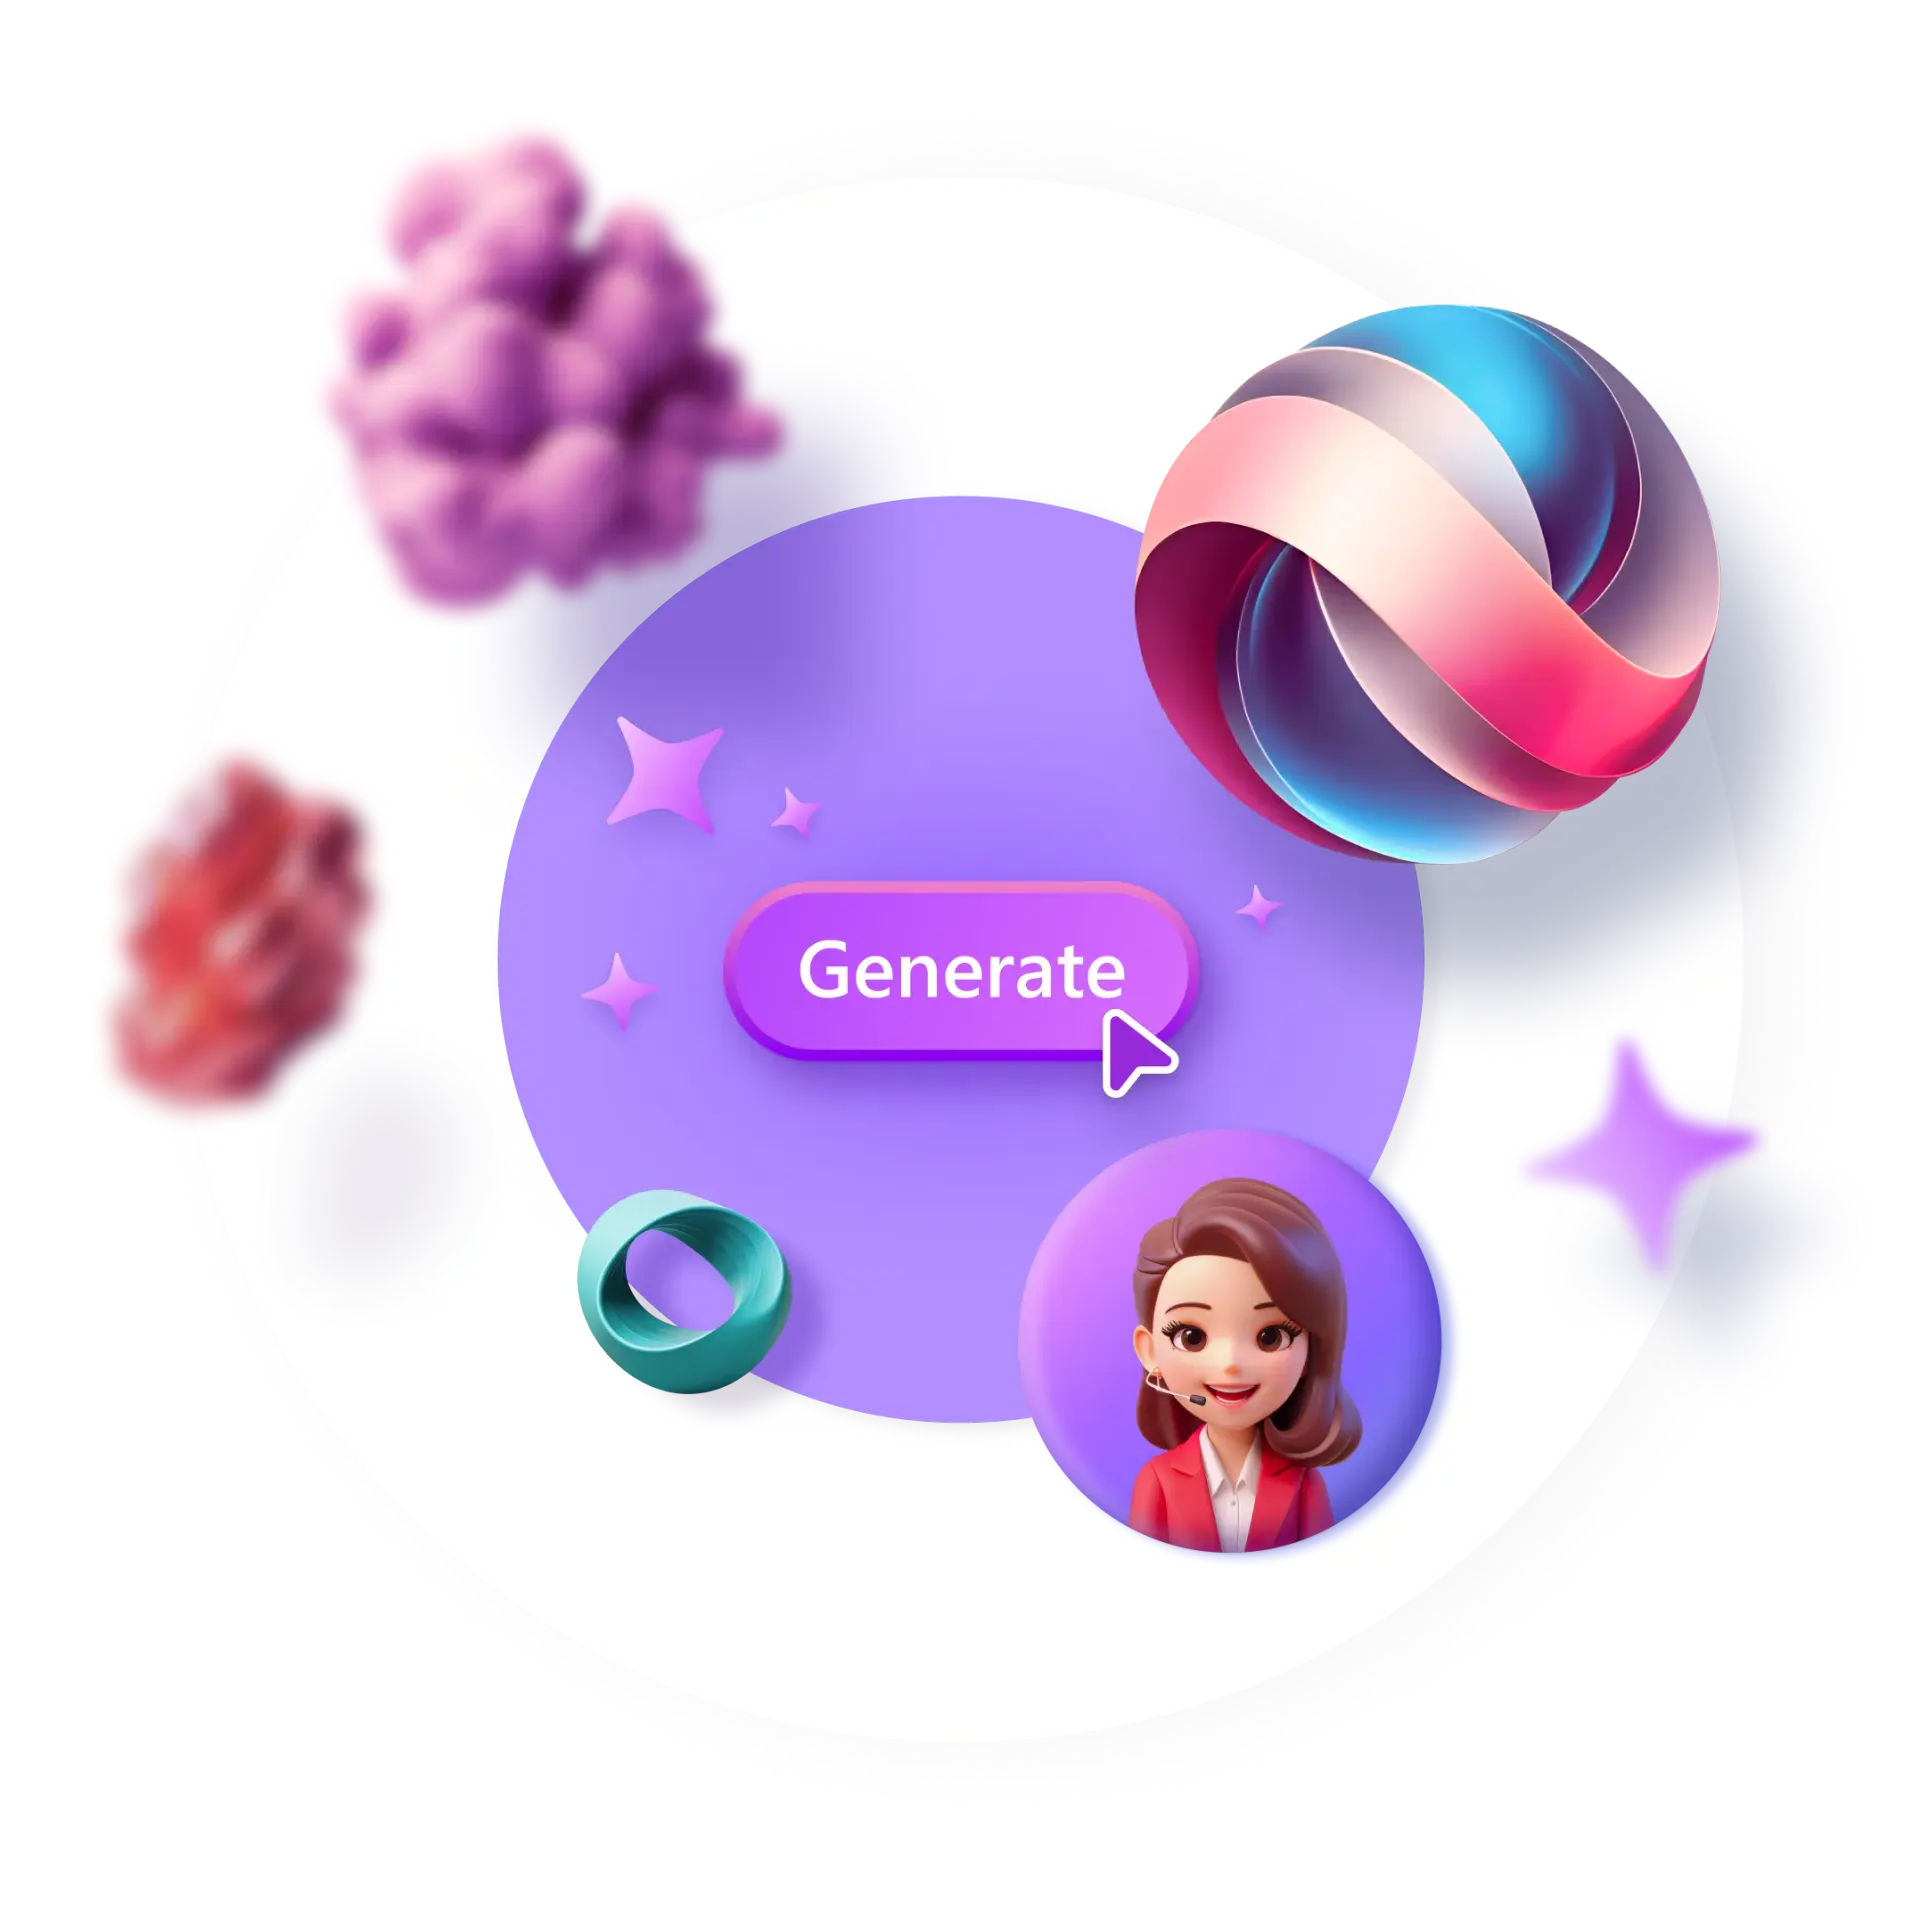 An image of a purple button with "Generate" on it, alongside colorful 3D graphical art renderings. 